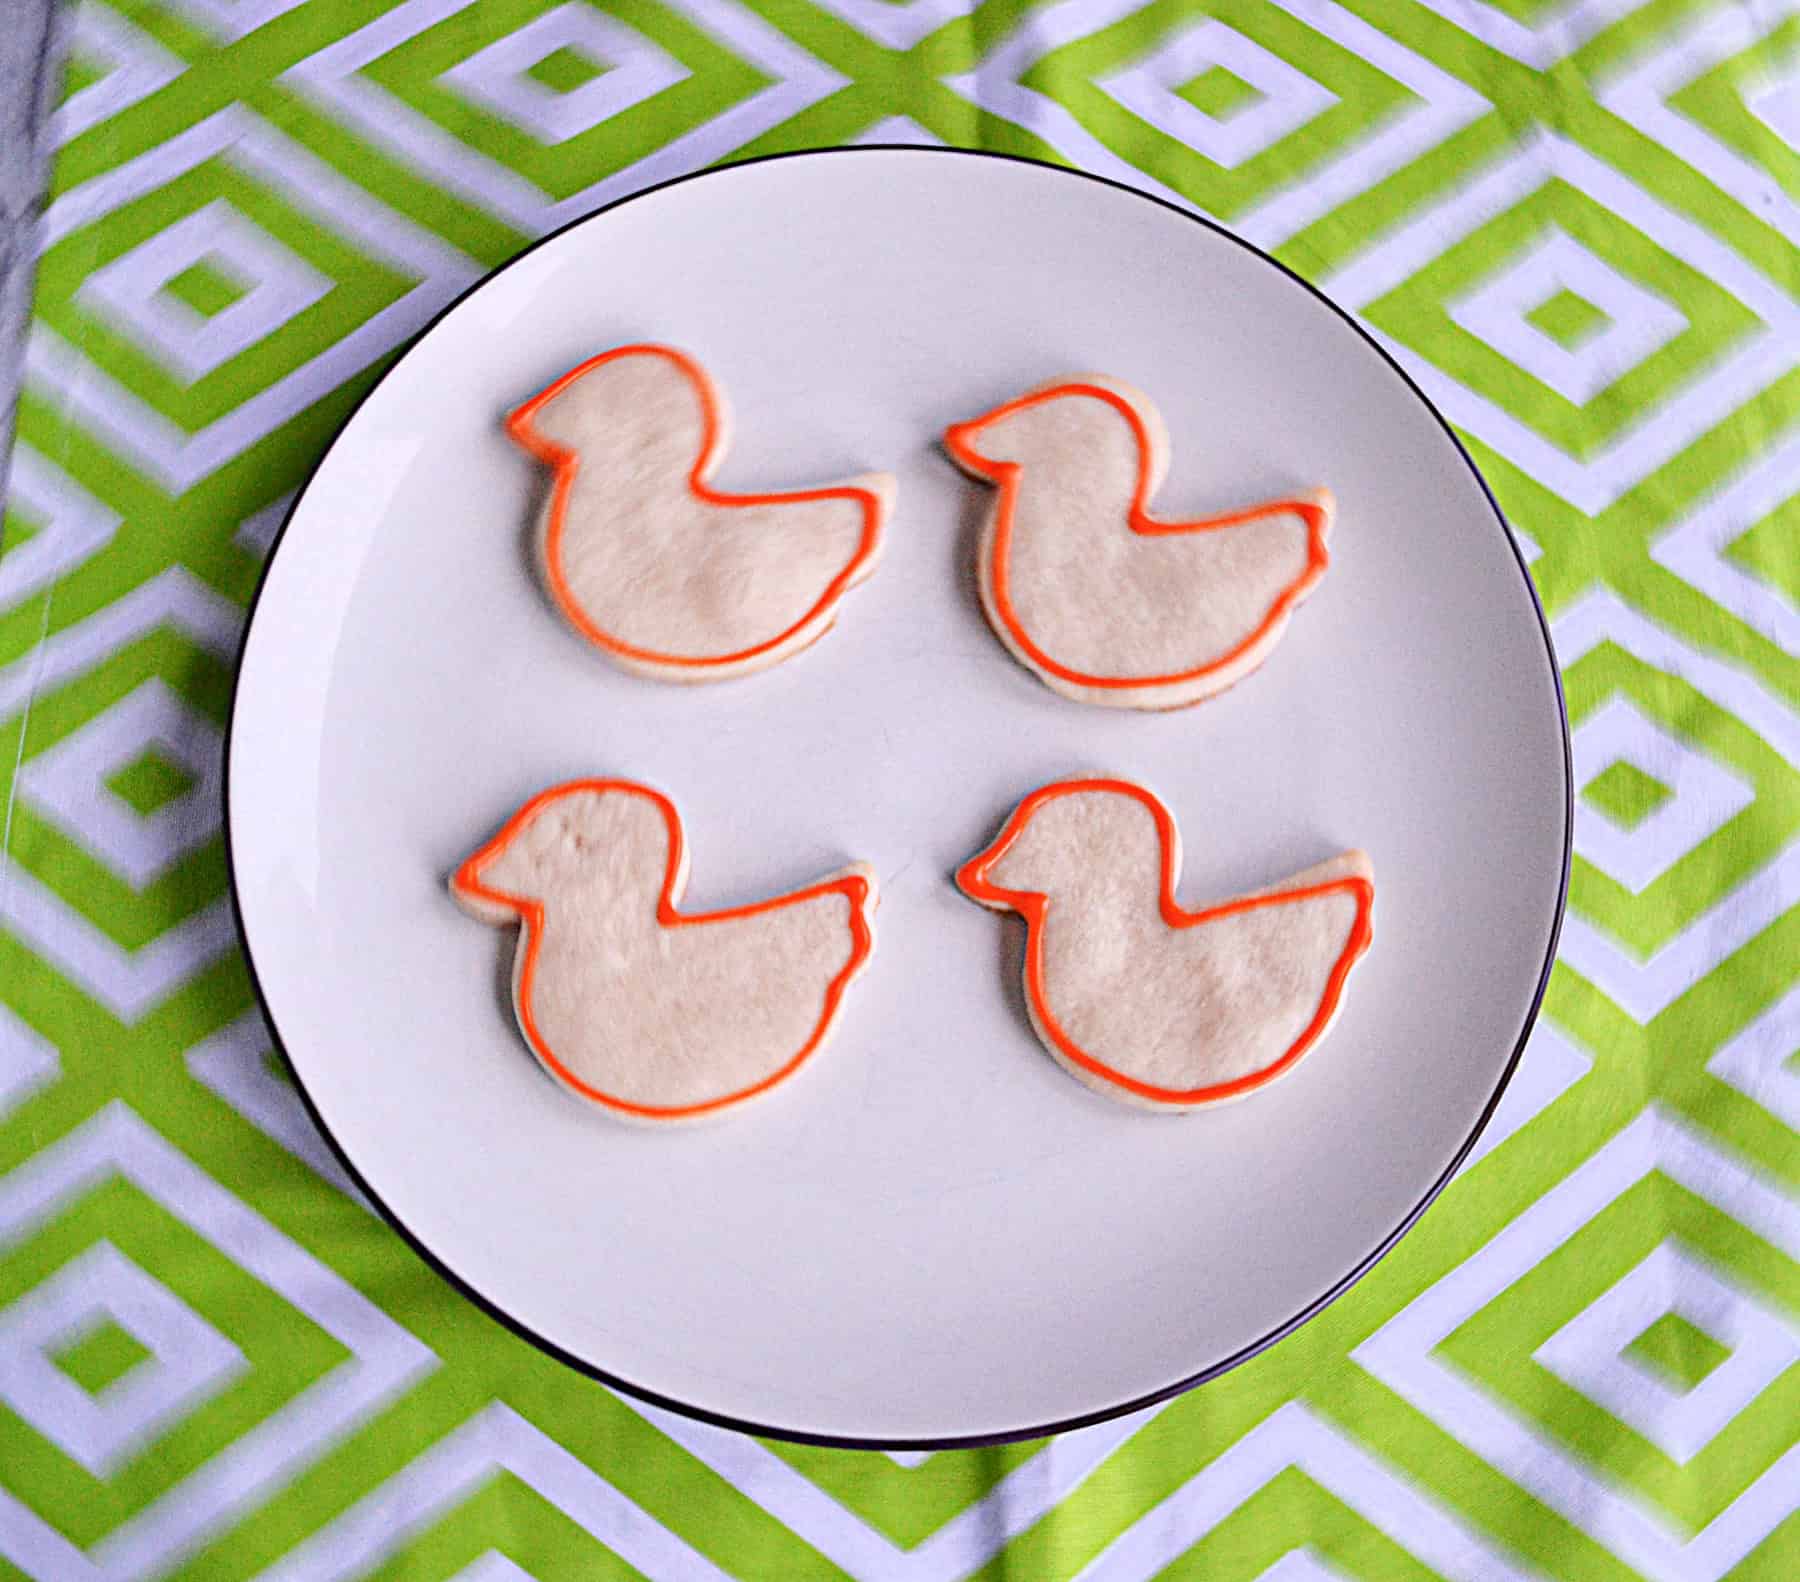 A plate with bird cookies on it and an orange icing outside on the cookies.